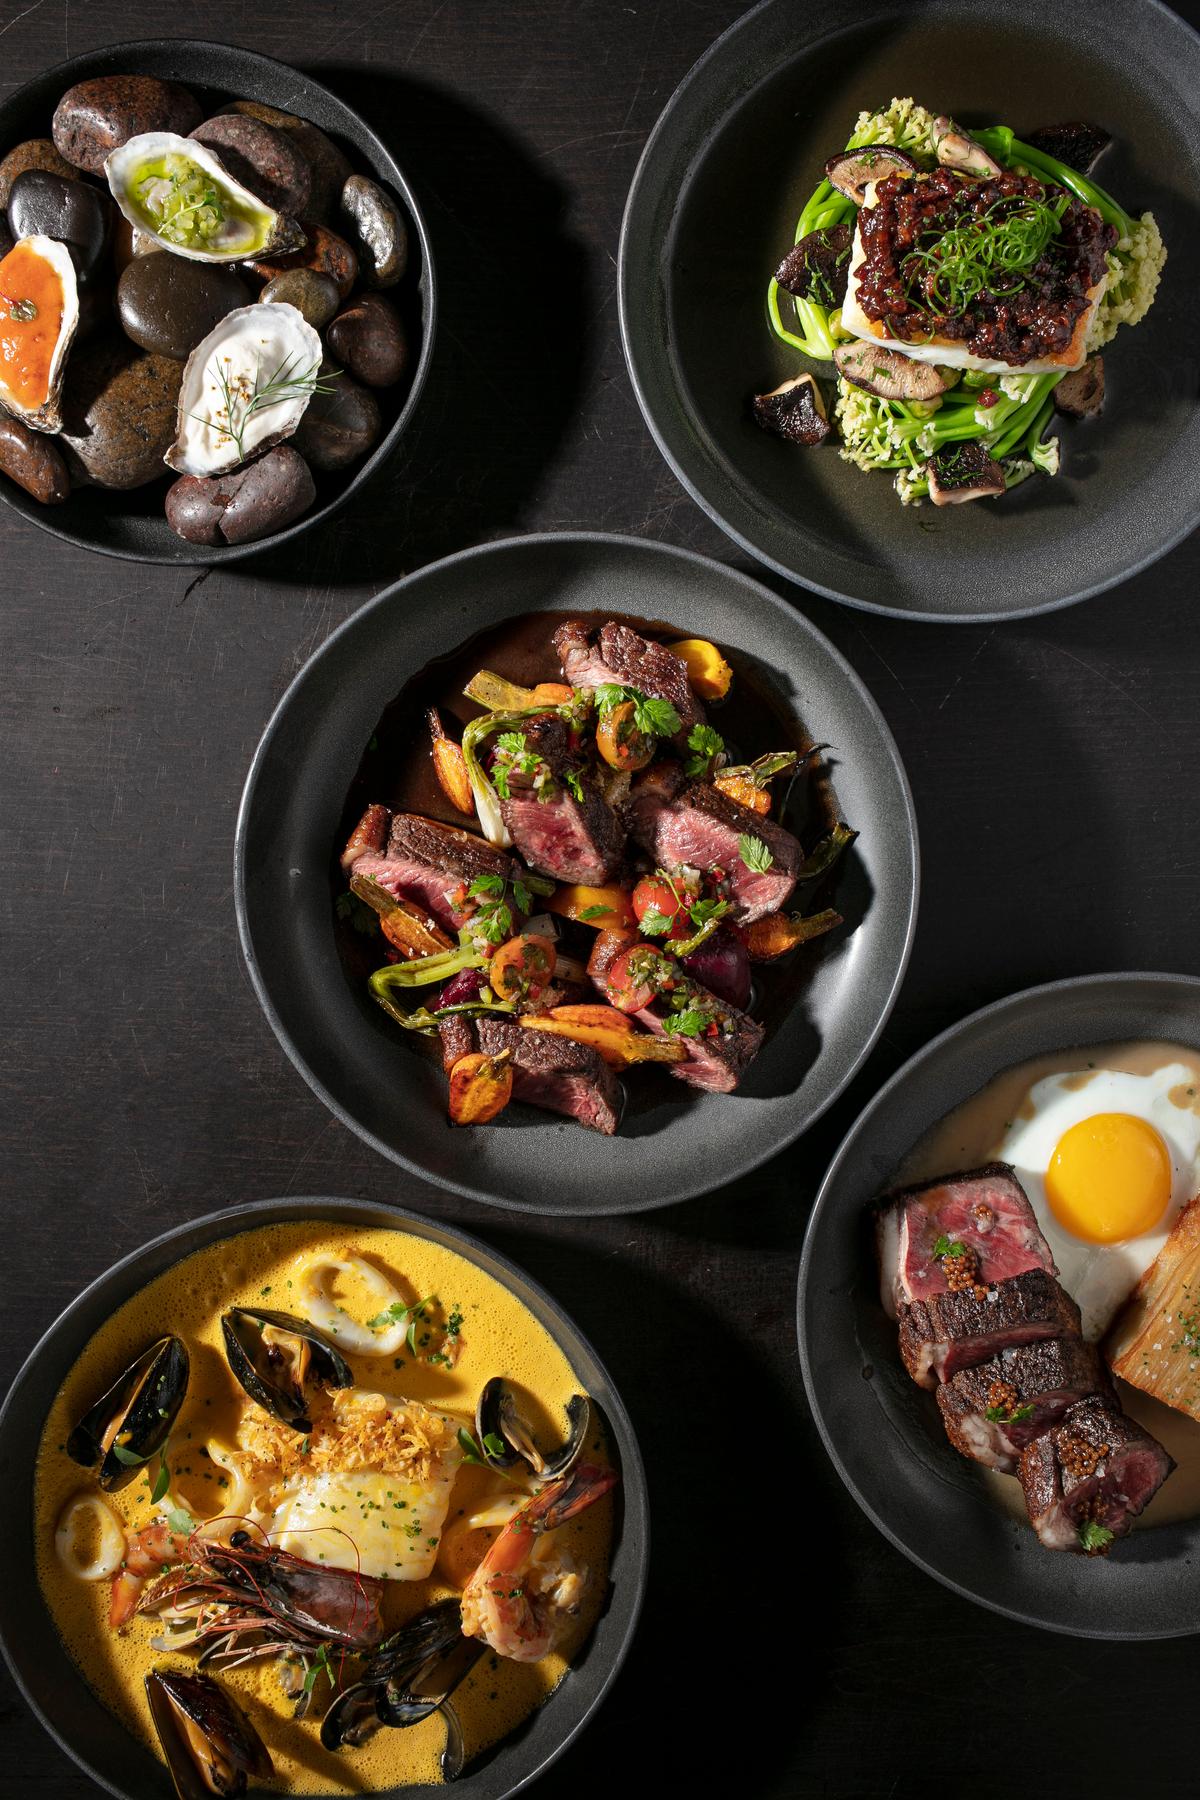 Ipanema's updated menu features sophisticated takes on Brazilian and Portuguese classics. (Melissa Hom)